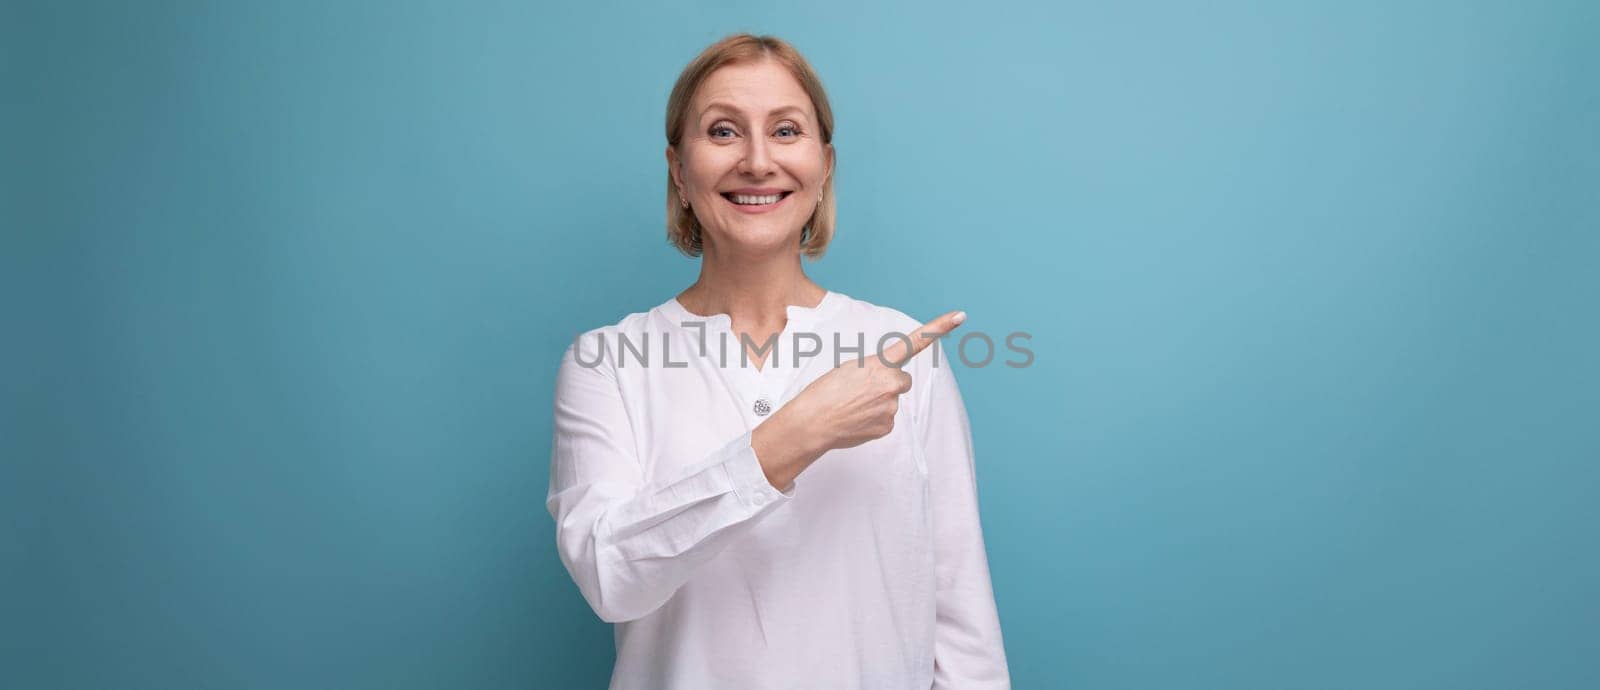 stylish blond middle-aged woman in a white blouse demonstrates something on a studio background with copyspace.